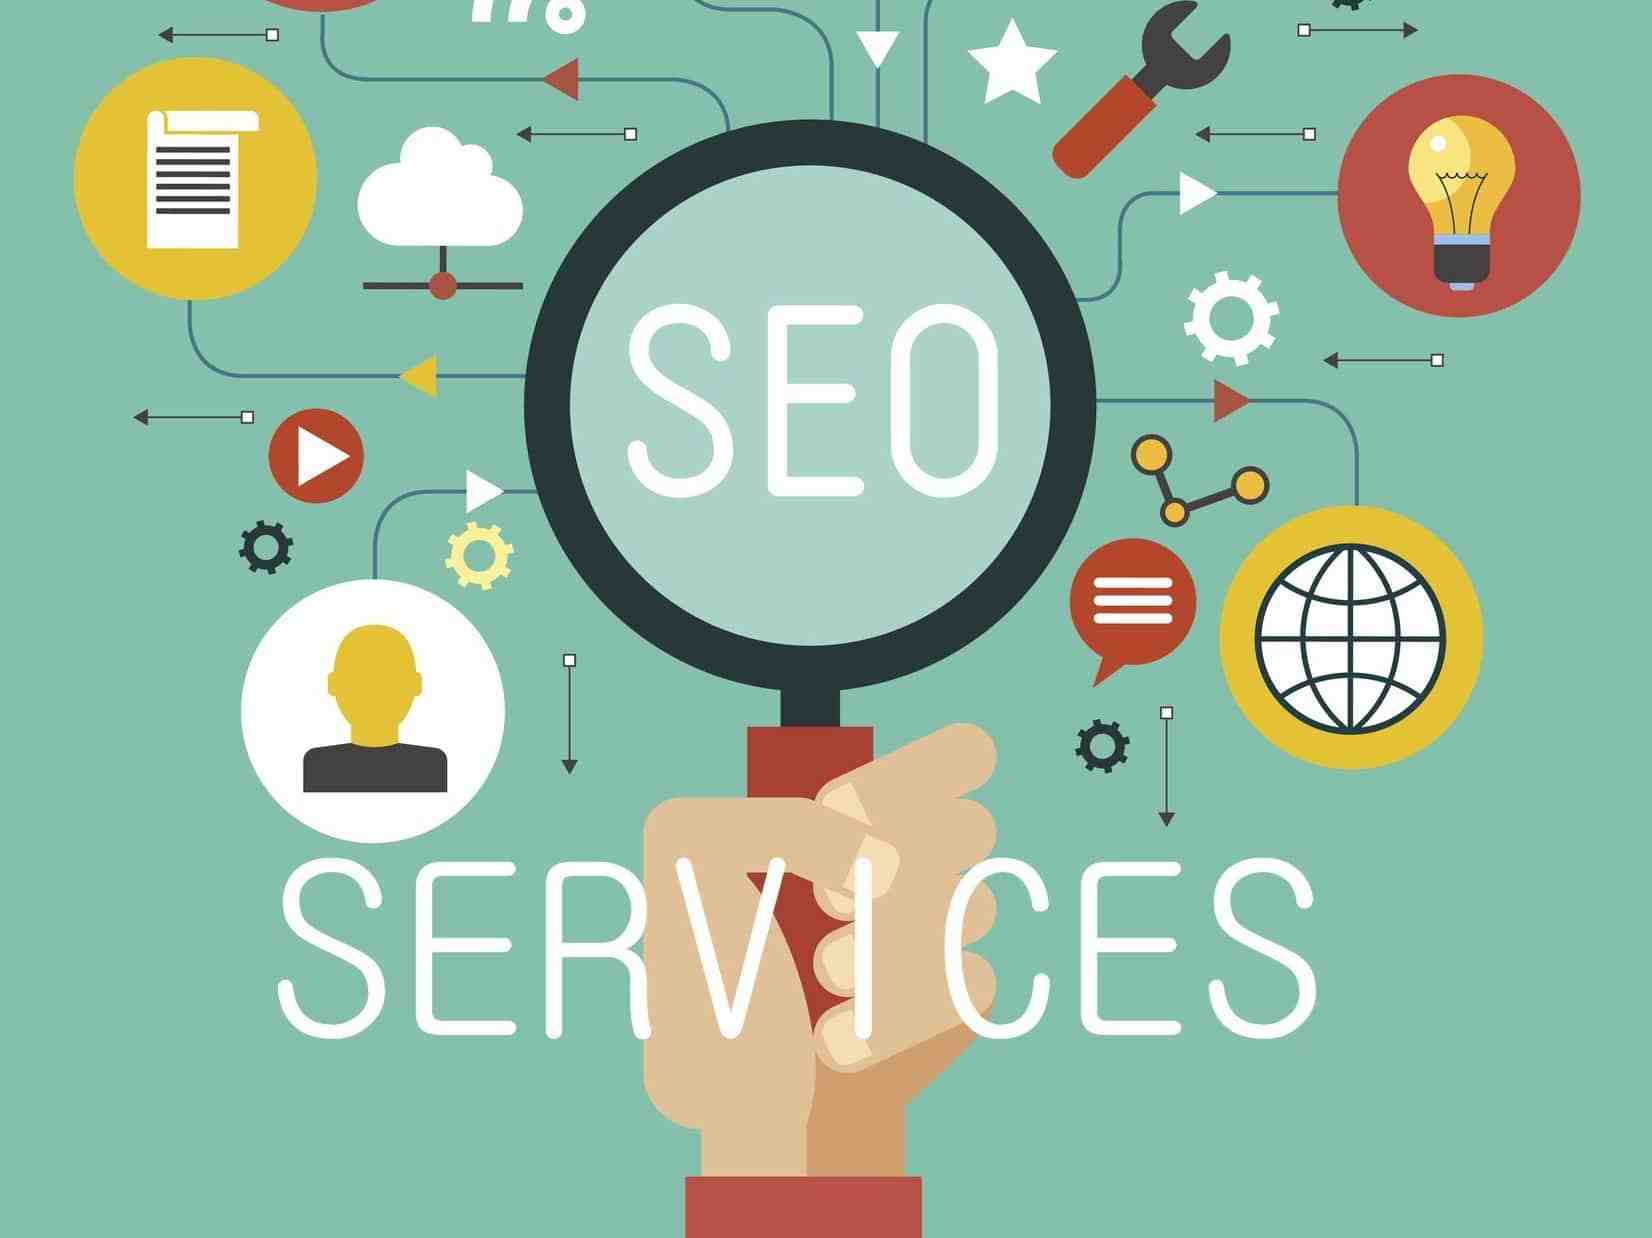 How much does SEO services cost?